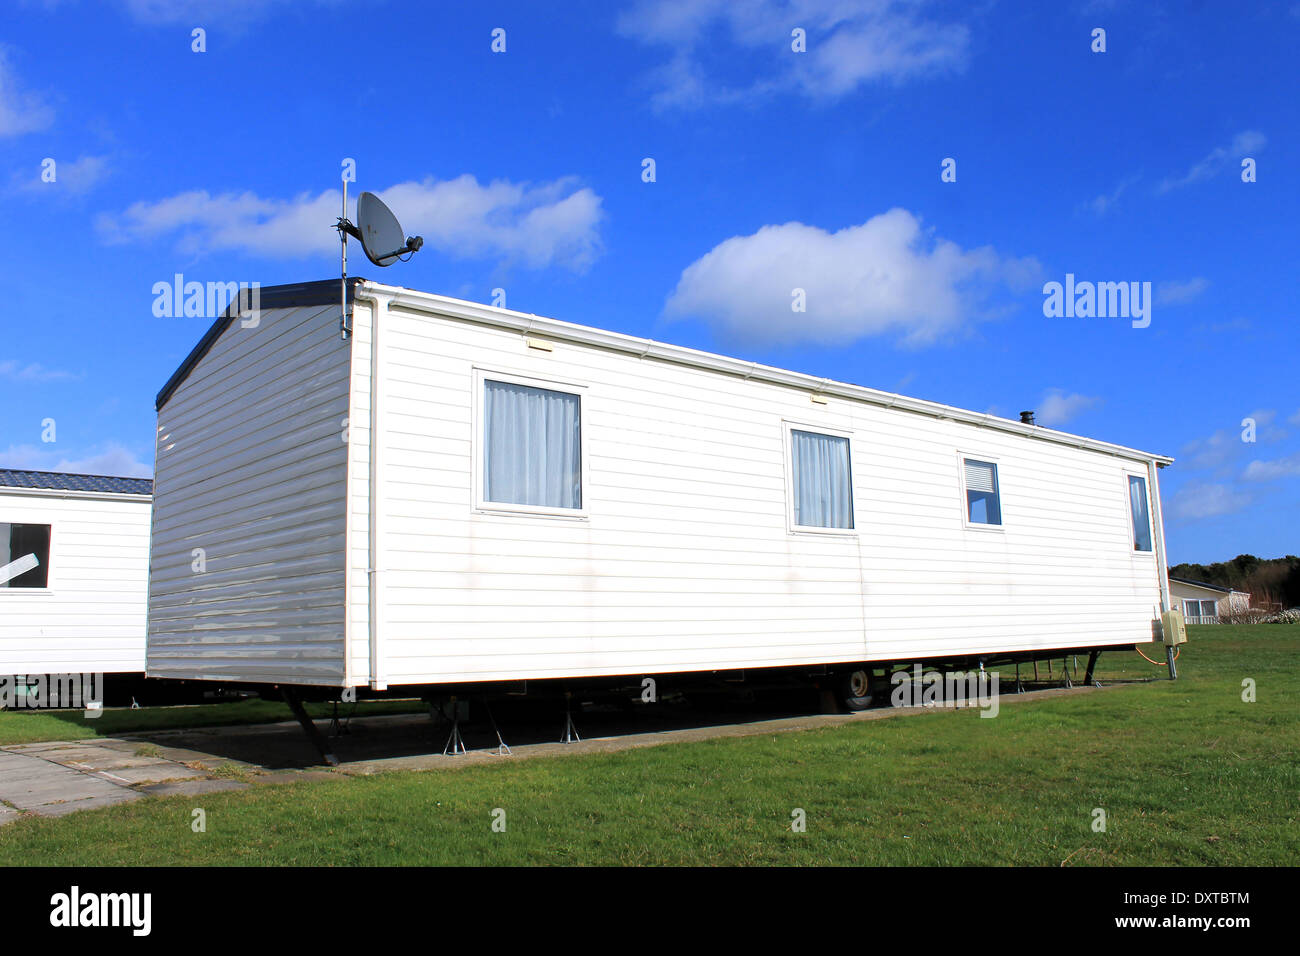 Side view of trailer on caravan park with blue sky and cloudscape background. Stock Photo